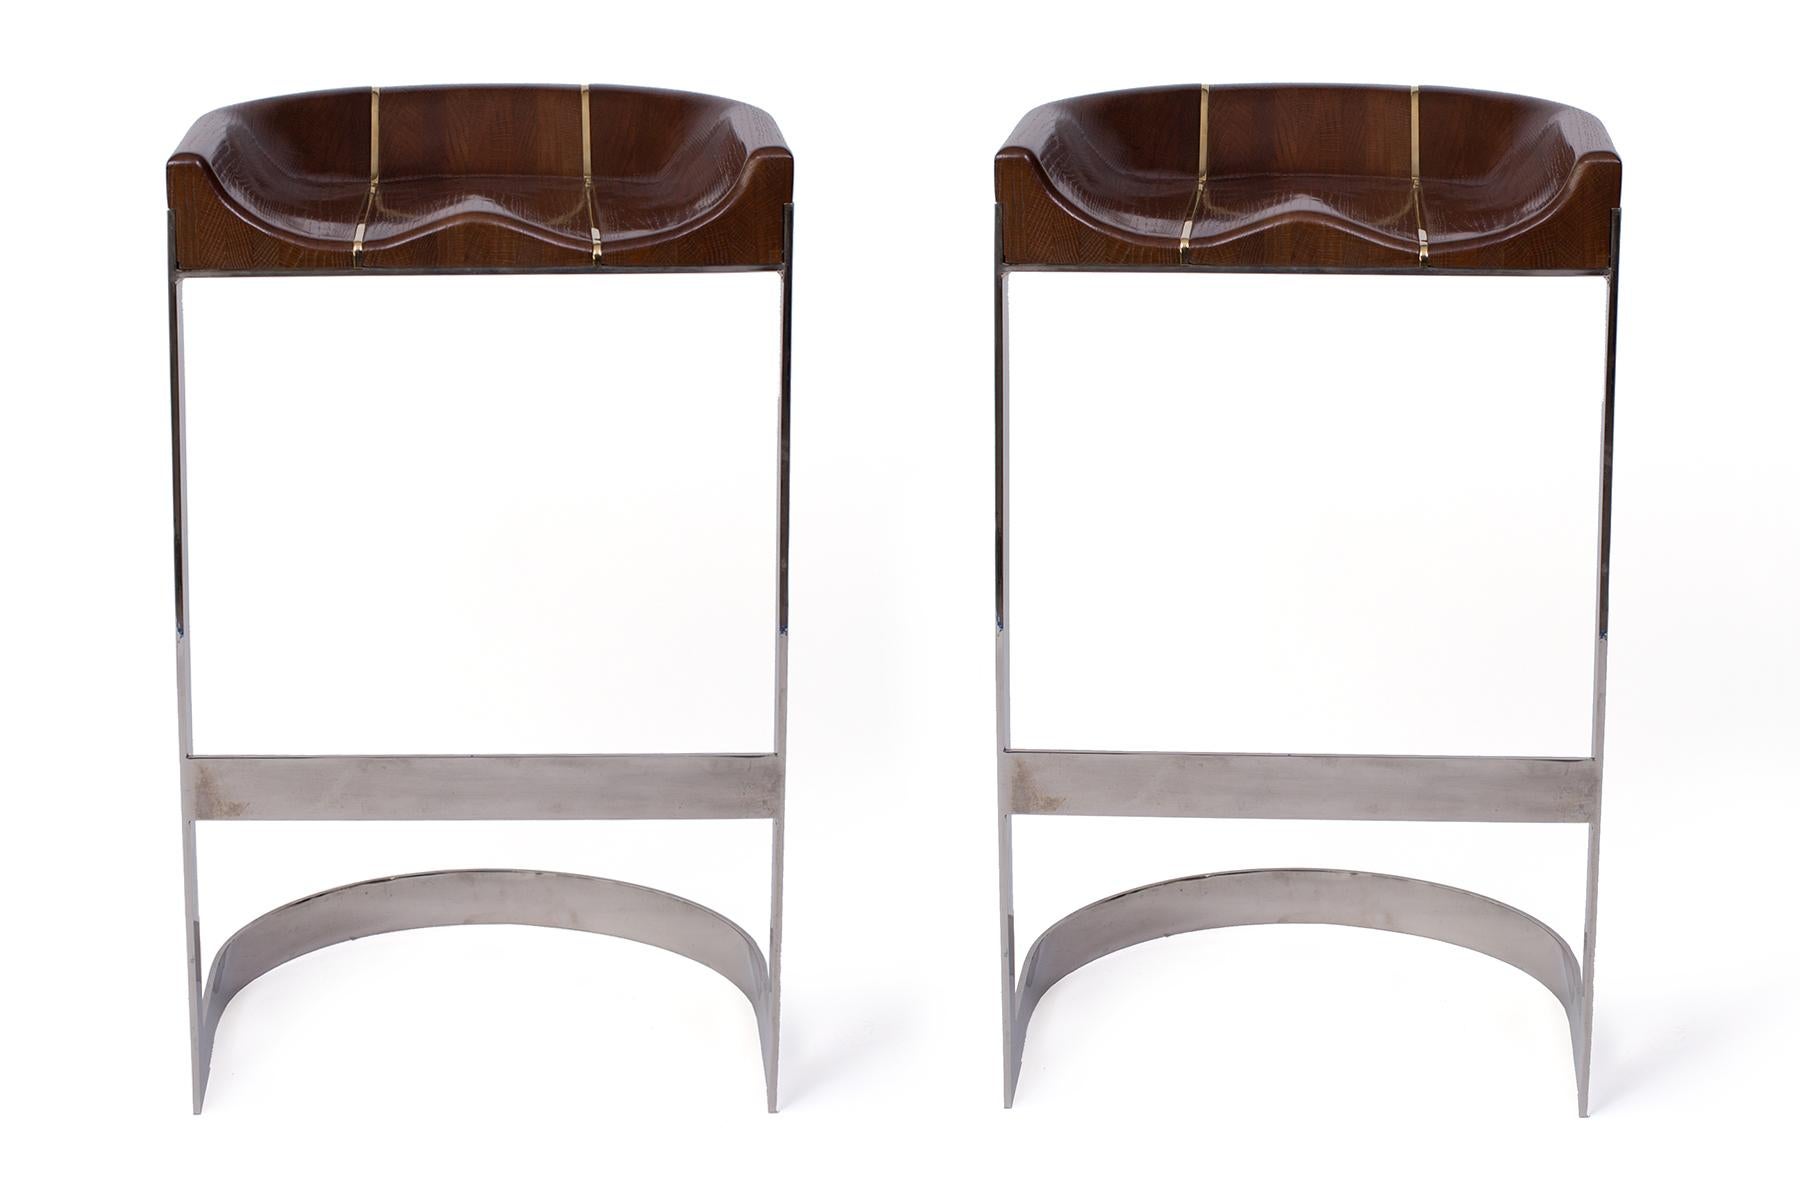 Early 1970s pair of solid oak and chrome barstools by Warren Bacon. Seats feature sleek brass inlay details. Price listed is for the pair.